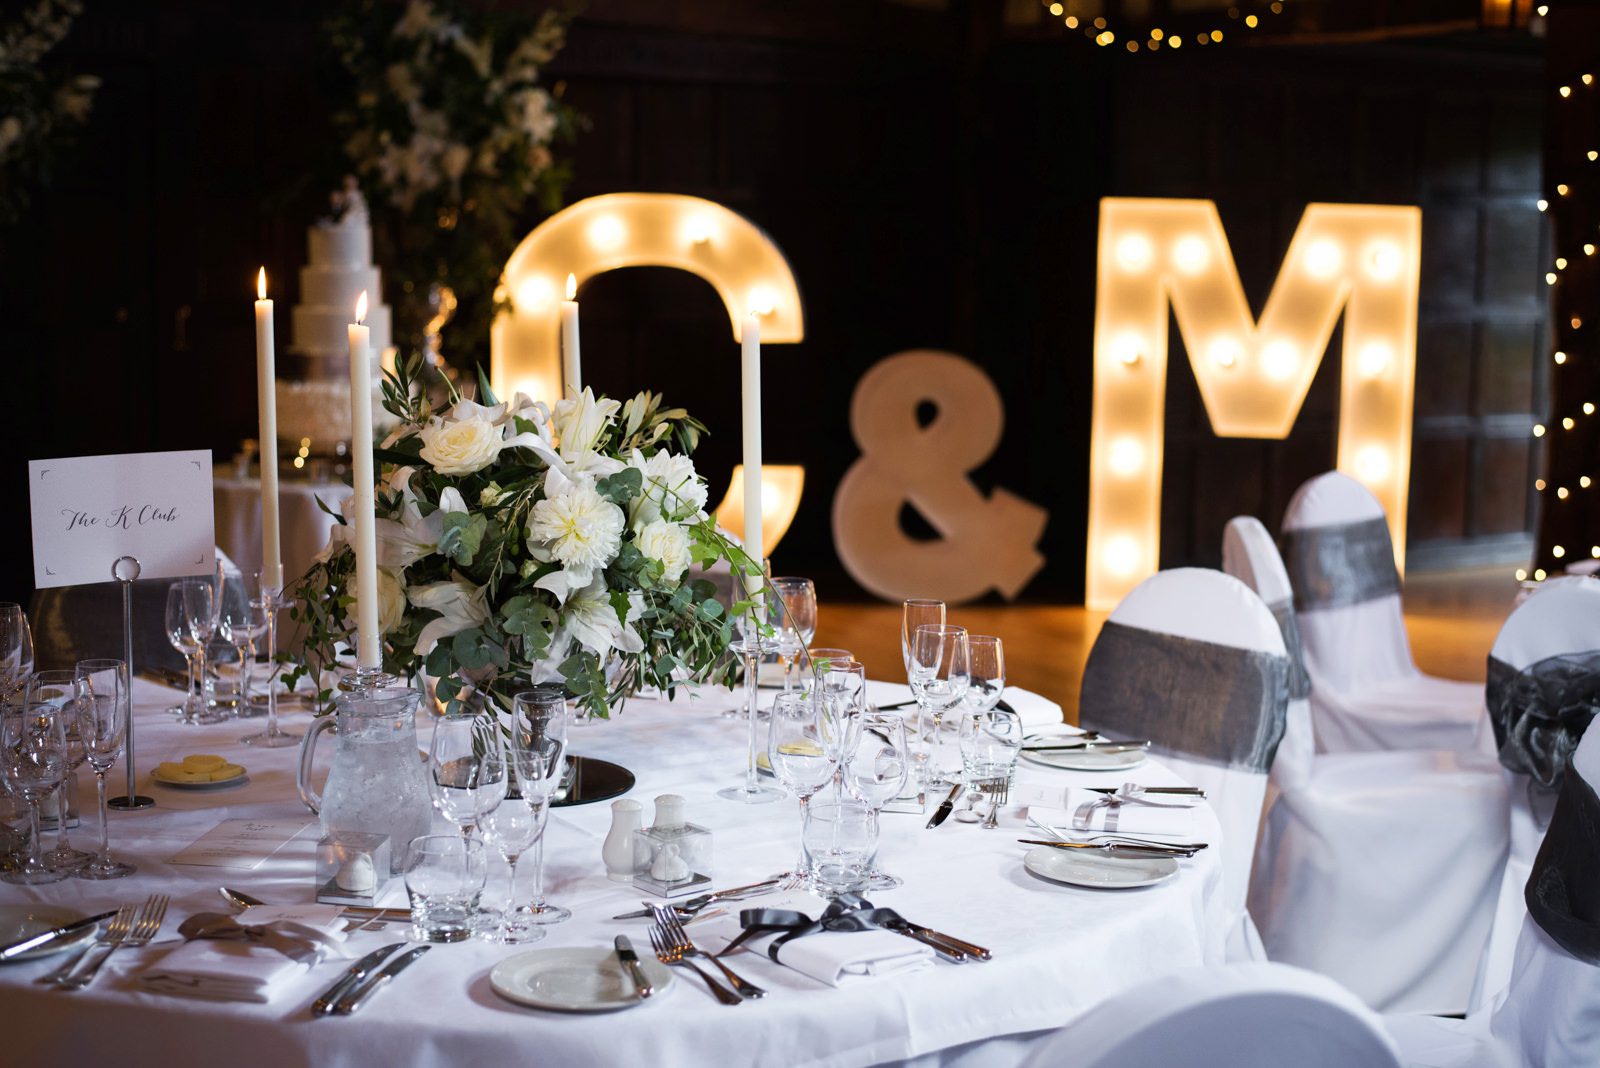 Elegant and stylish wedding table idea for a white wedding at Great Fosters Hotel.